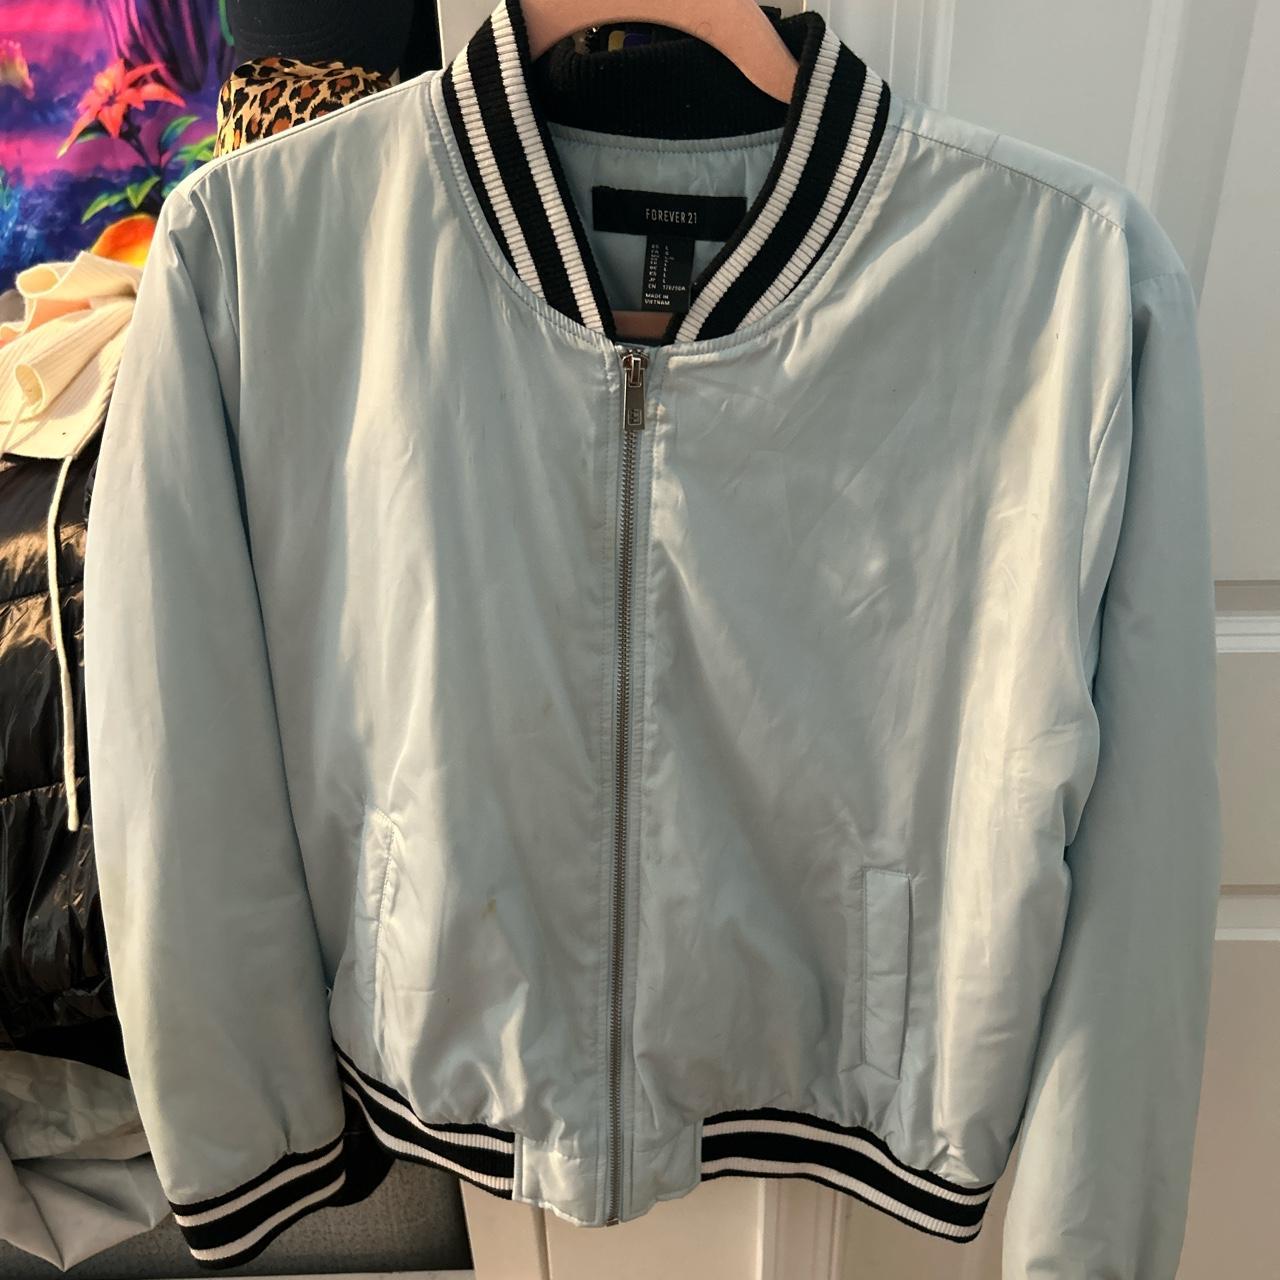 Turquoise bomber jacket with primo on the back - Depop